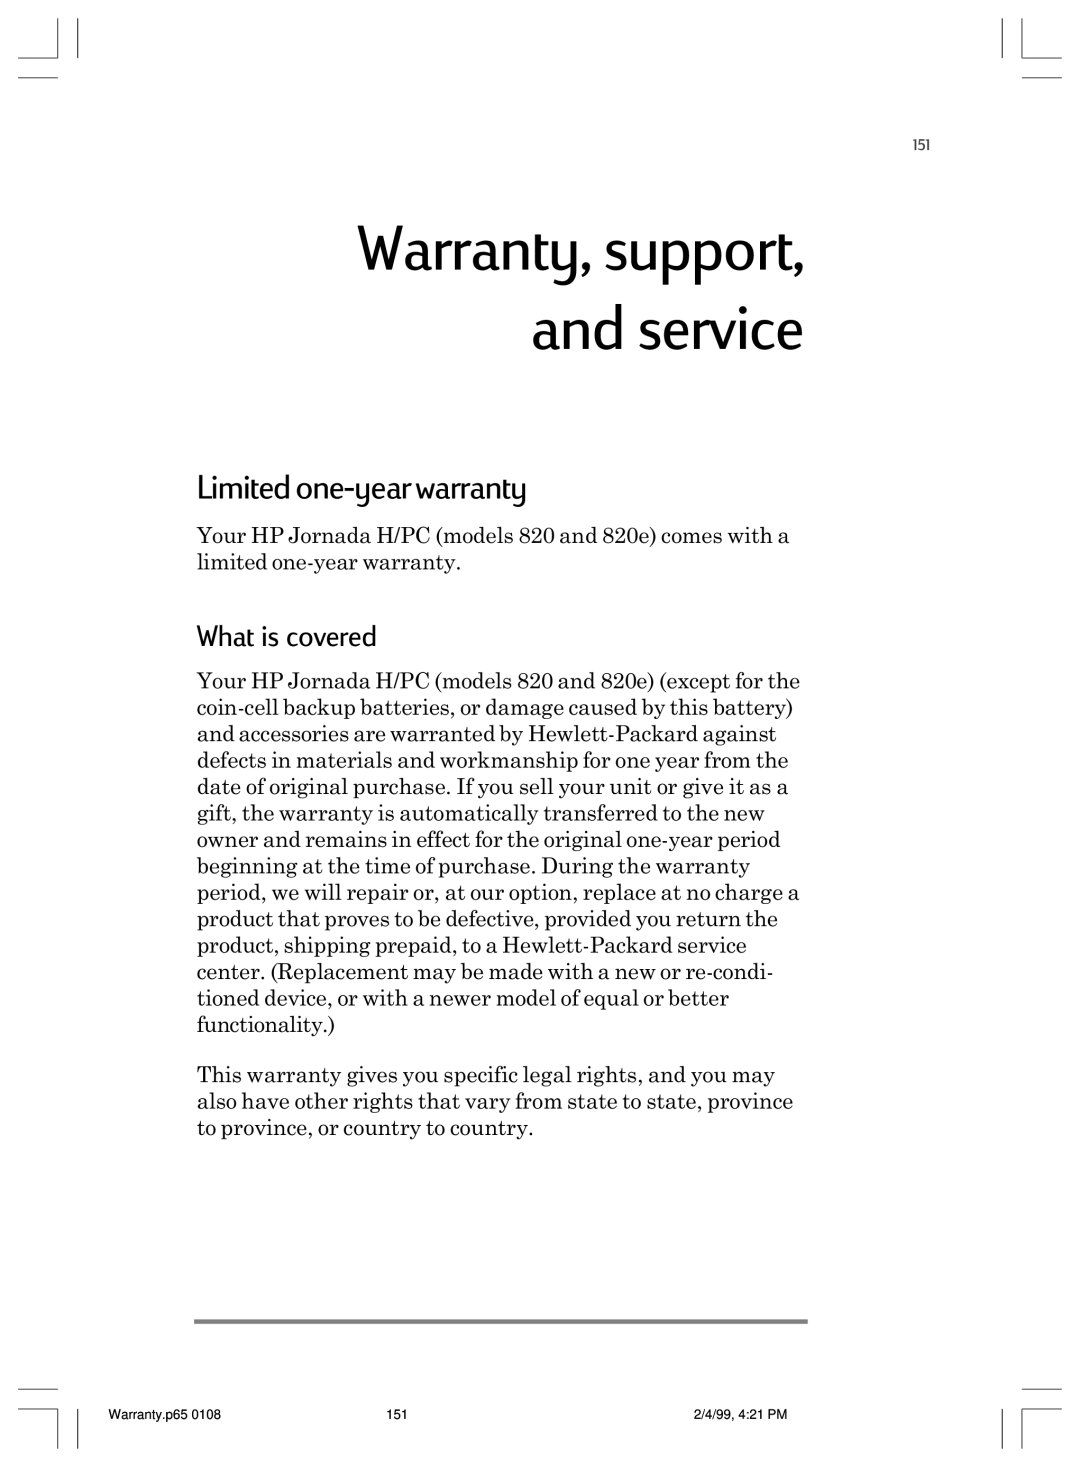 HP 820 E manual Warranty, support, and service, Limited one-year warranty, What is covered 